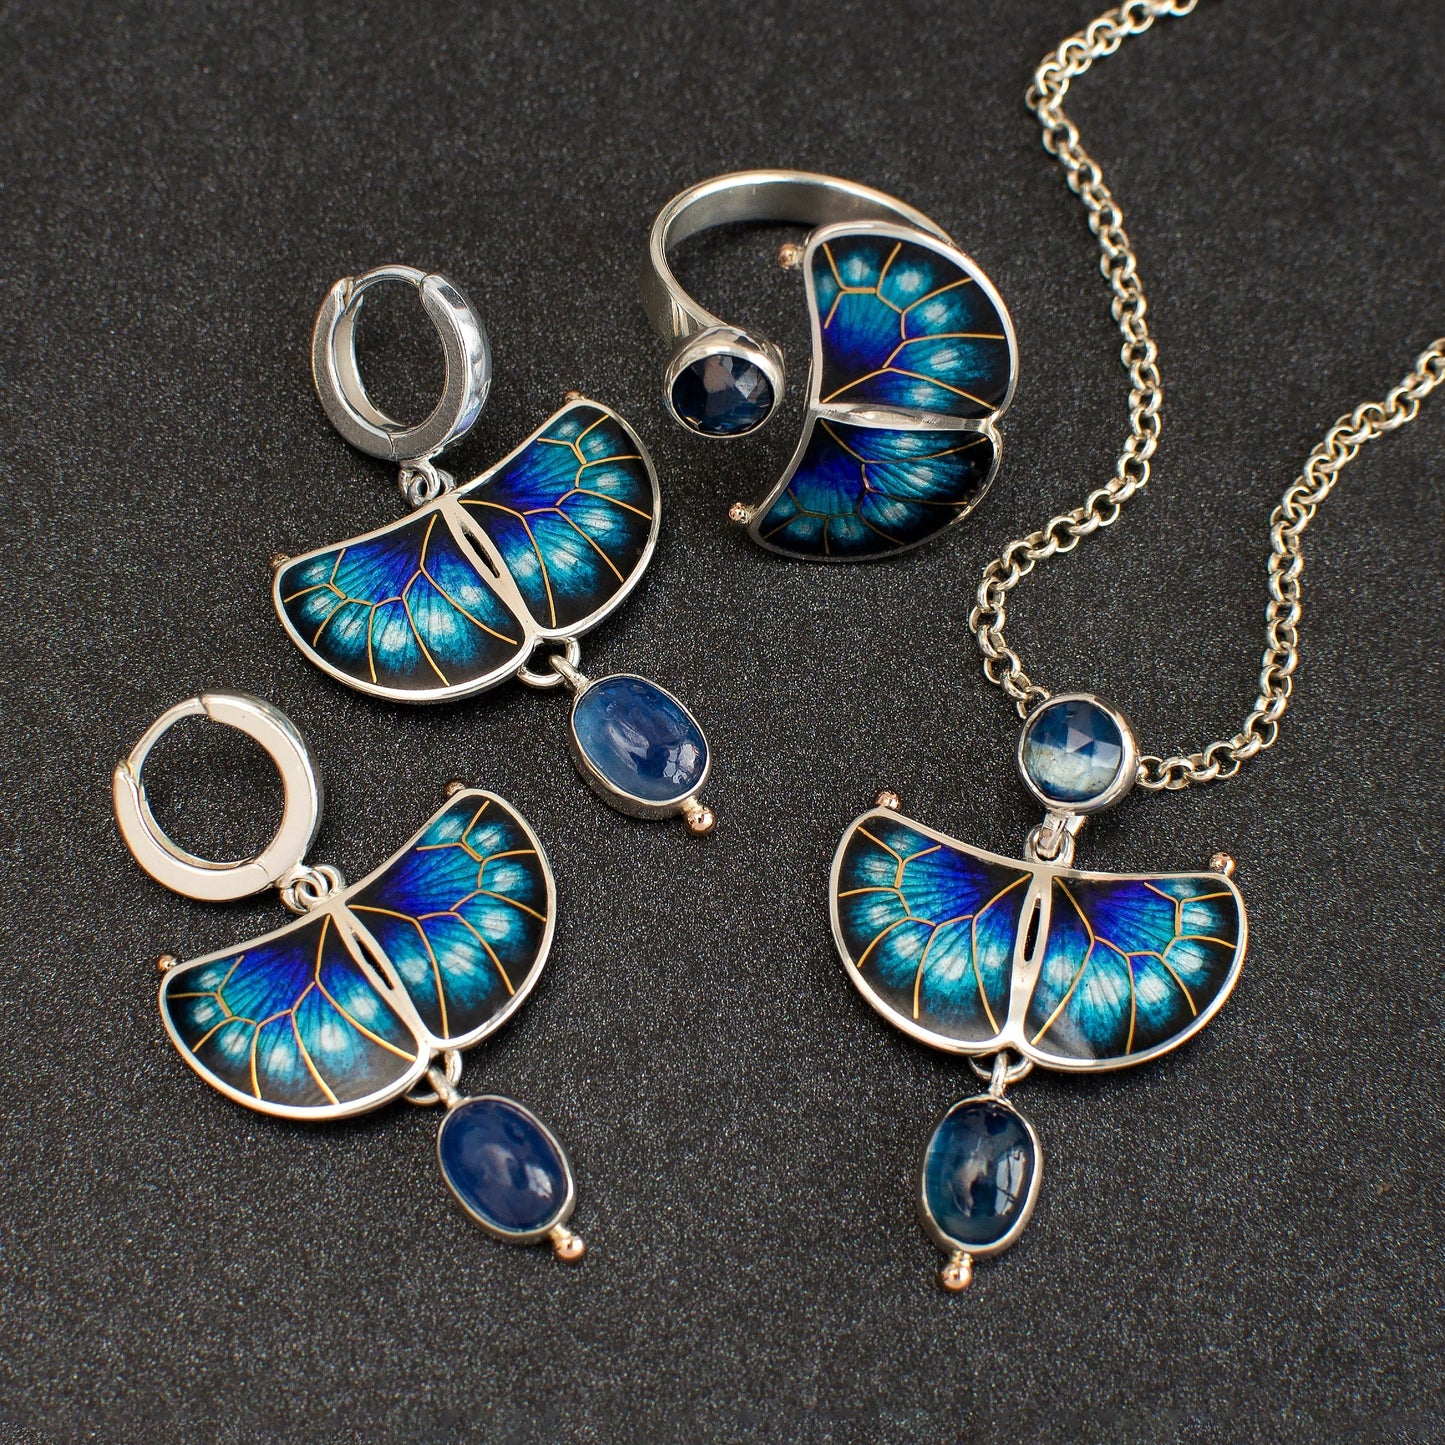 Cloisonne Enamel Set "Butterfly" With Kyanite And Gold